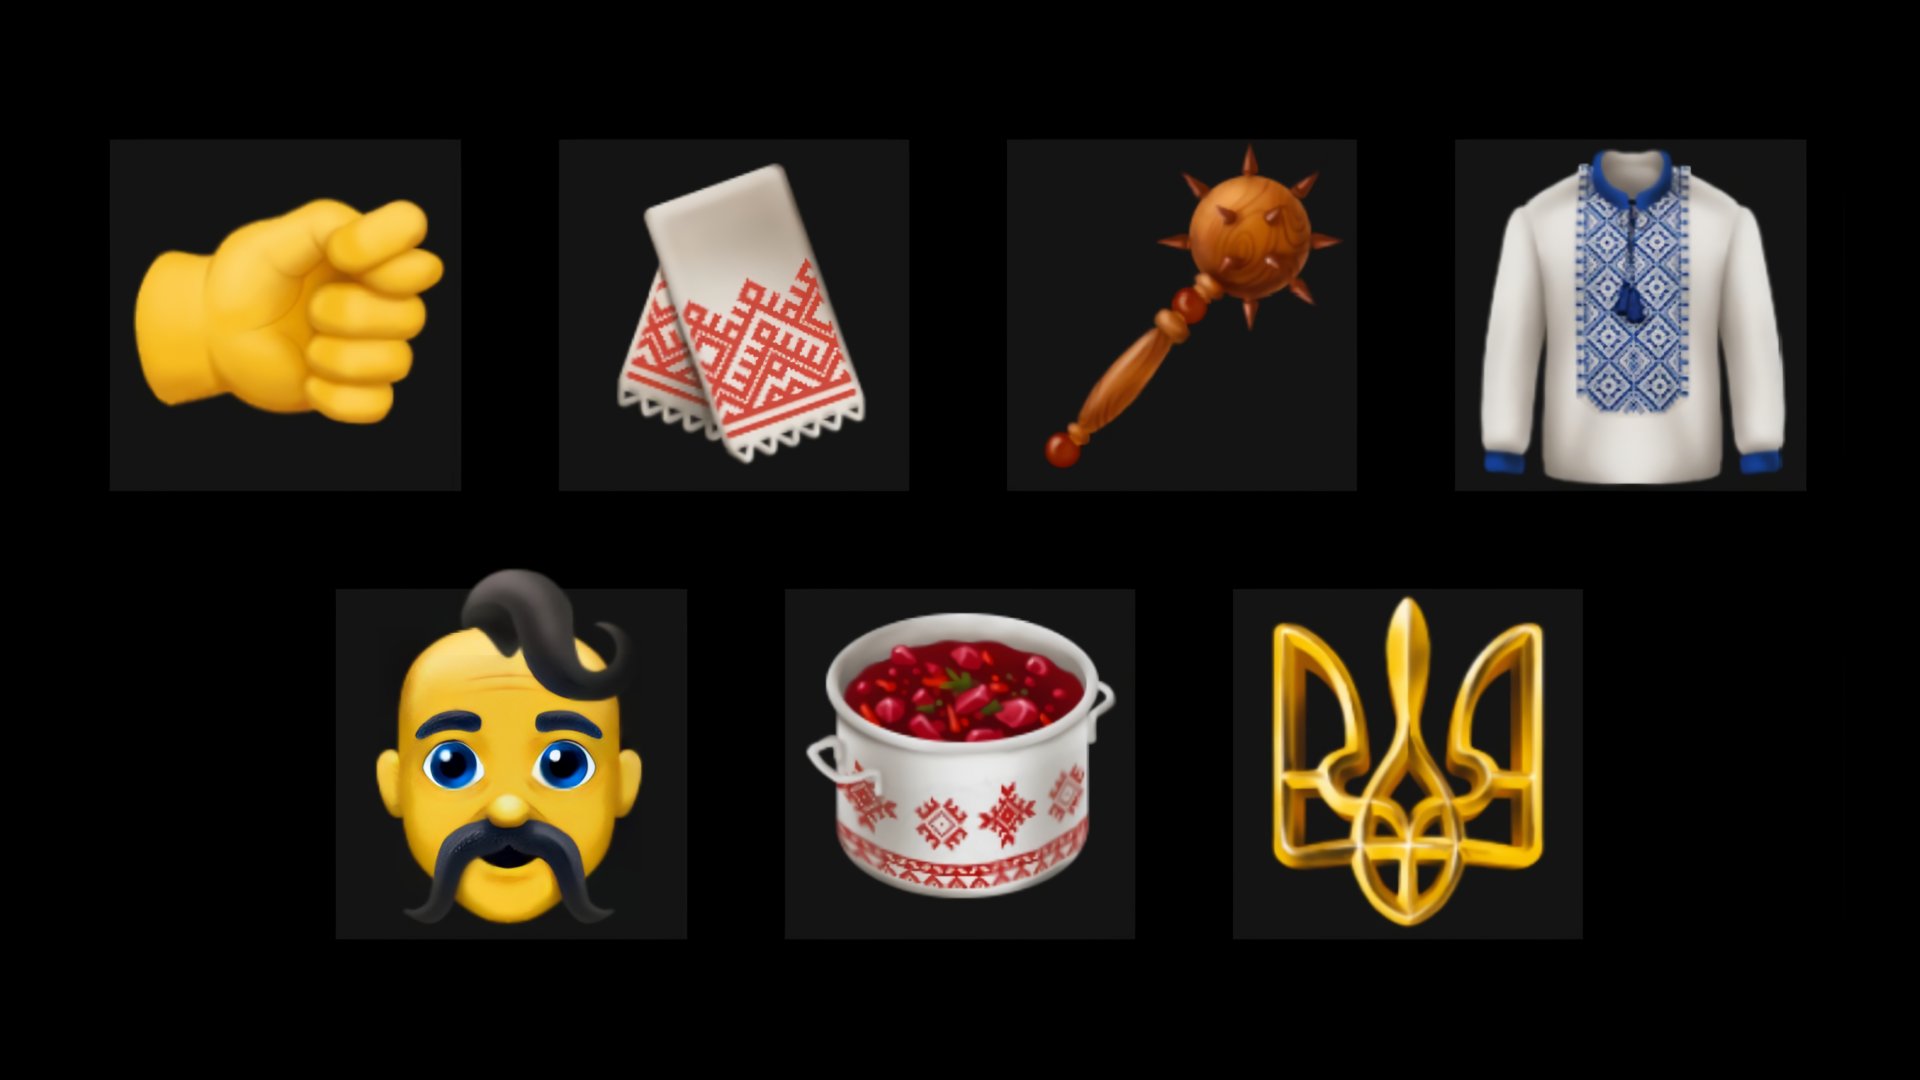 Ukrainian emojis may be approved for Android and iOS by October